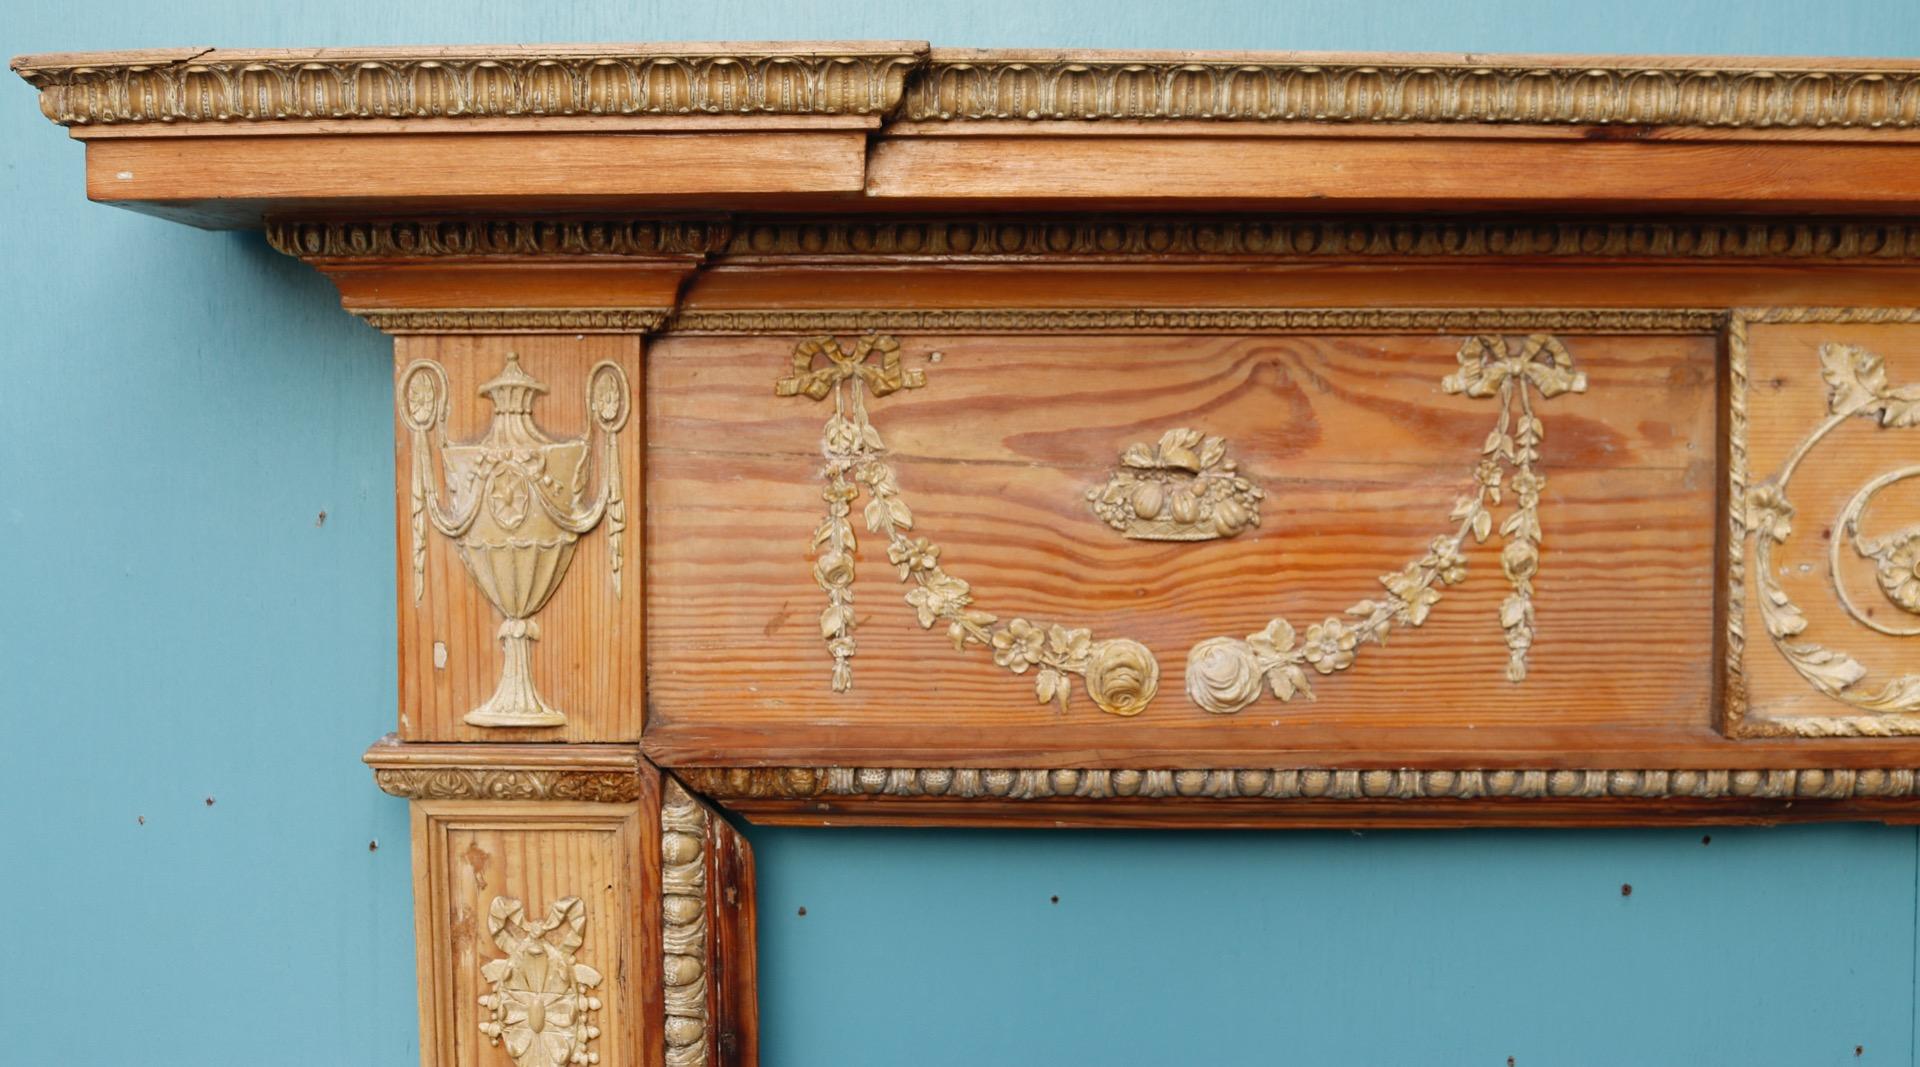 A Georgian style pine fire surround with composition decoration. The central frieze depicts a human form, possibly the Greek God Apollo.
Additional dimensions 
Opening height 117.5 cm
Opening width 132 cm
Width between outsides of the foot